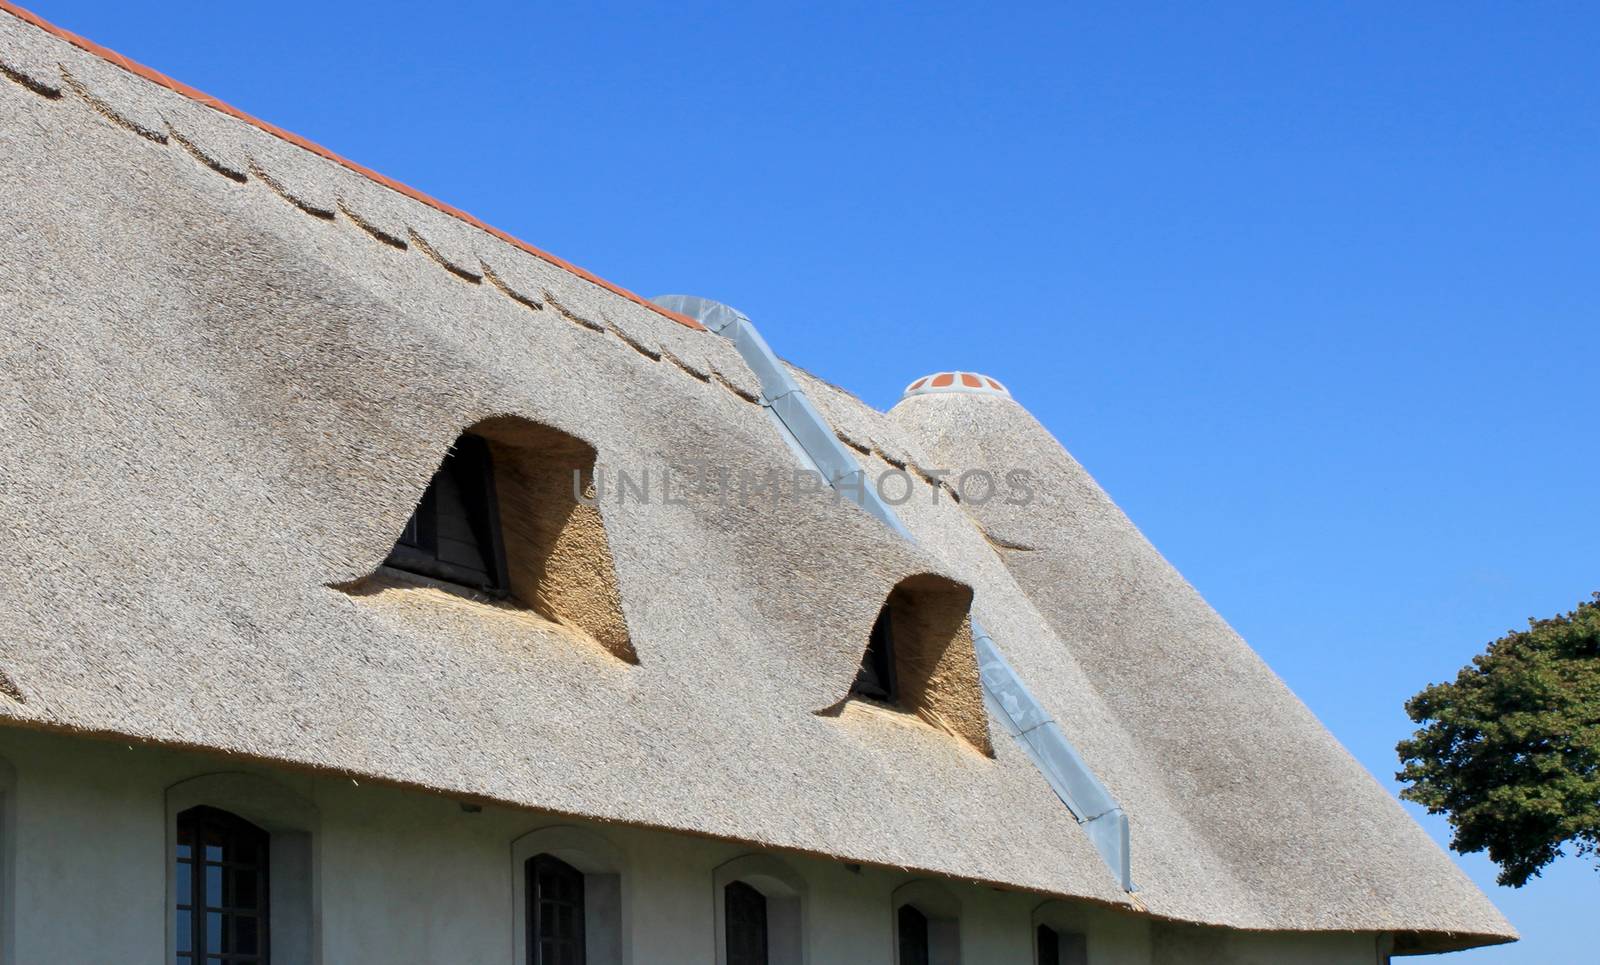 Cover thatch roof of a cottage on a blue sky background